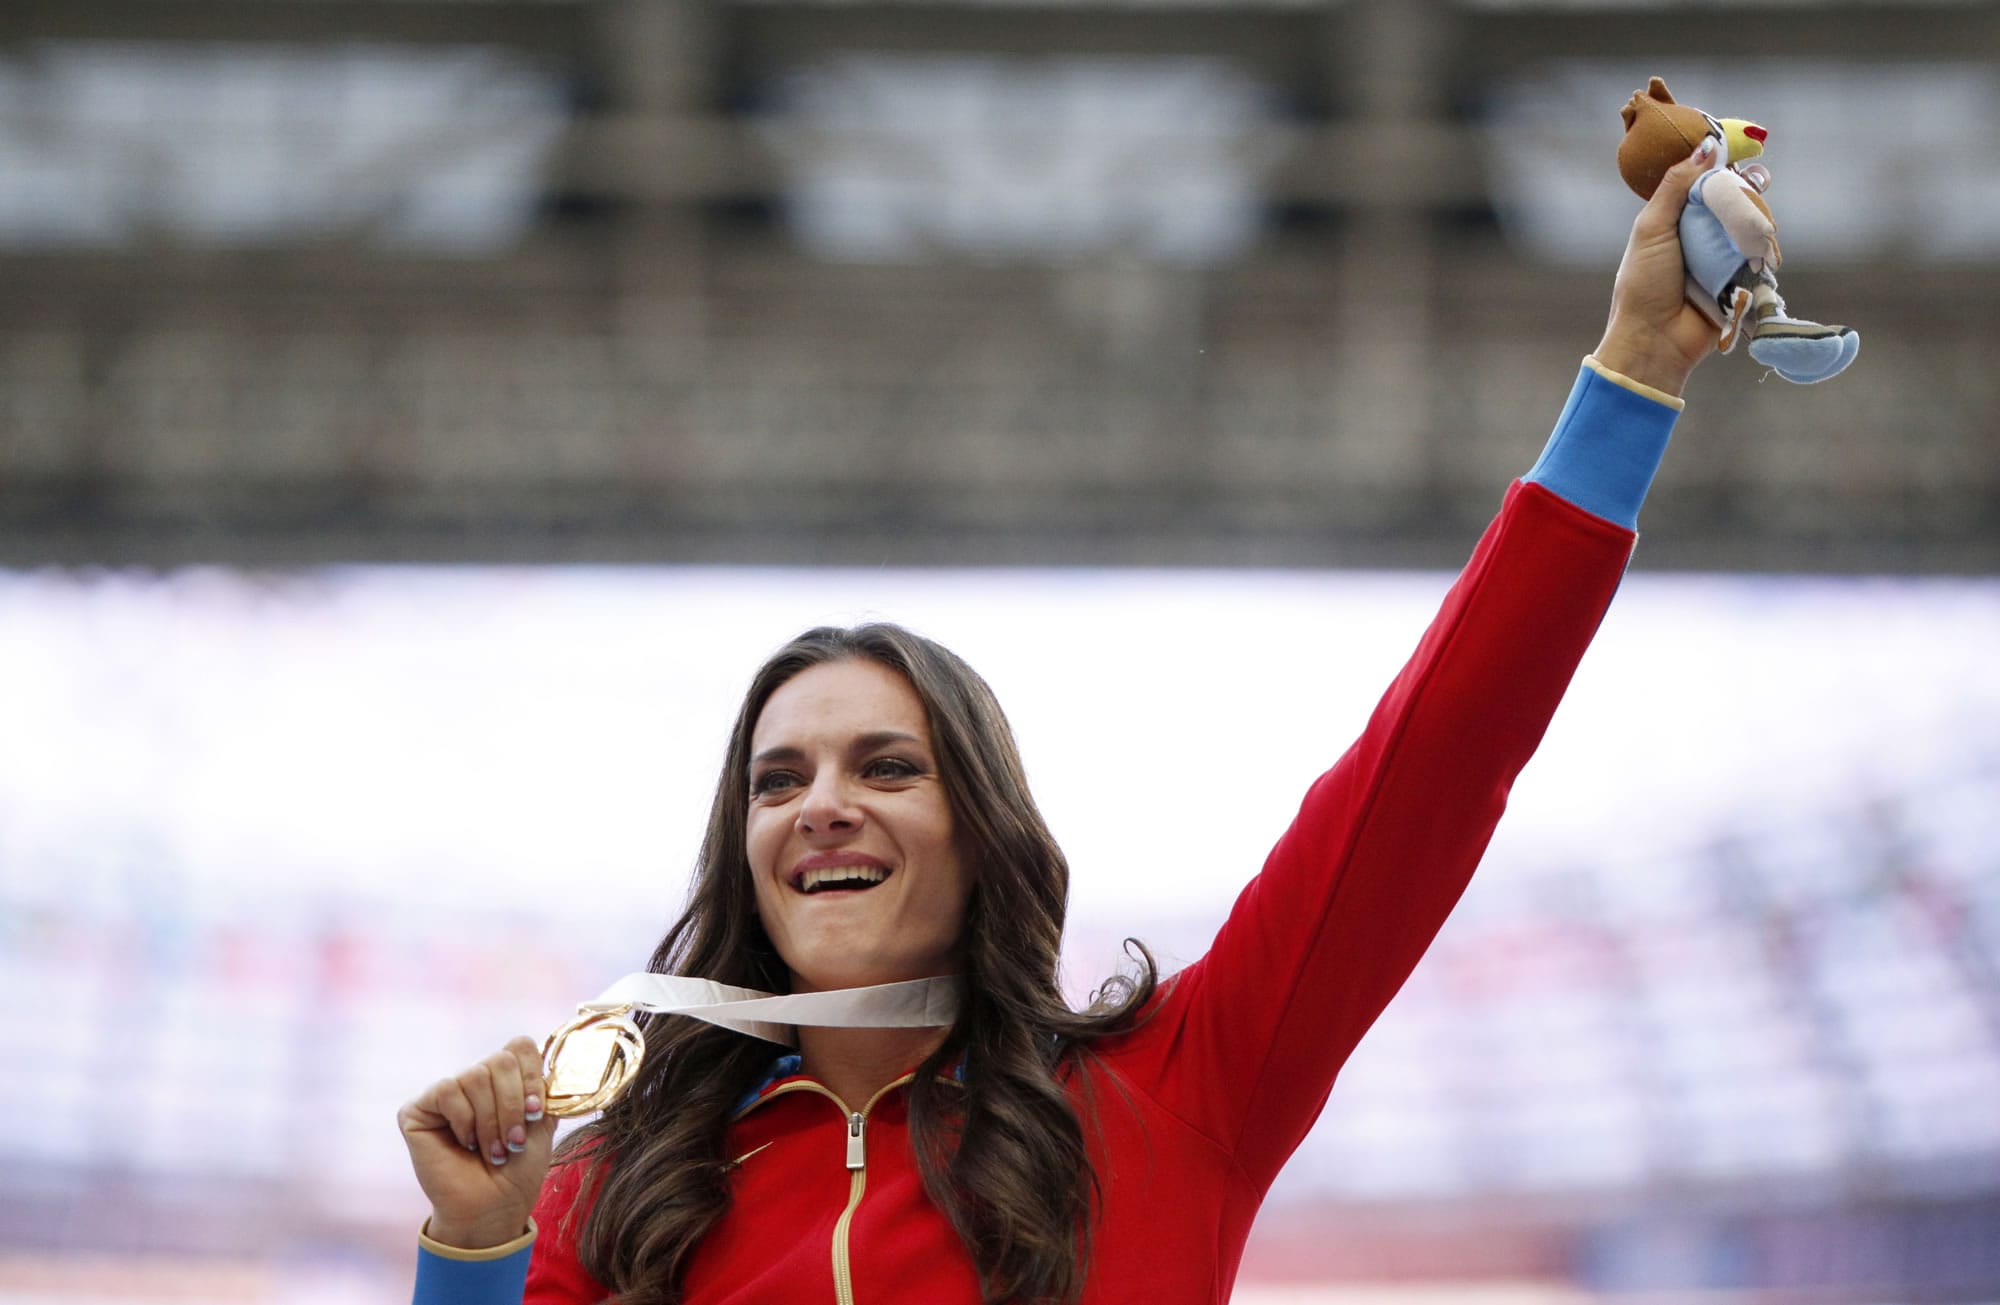 Russia's Yelena Isinbayeva gestures to the crowd with her gold medal in the women's pole vault as she stands on the podium during the medal ceremony at the World Athletics Championships in the Luzhniki stadium in Moscow on Thursday.